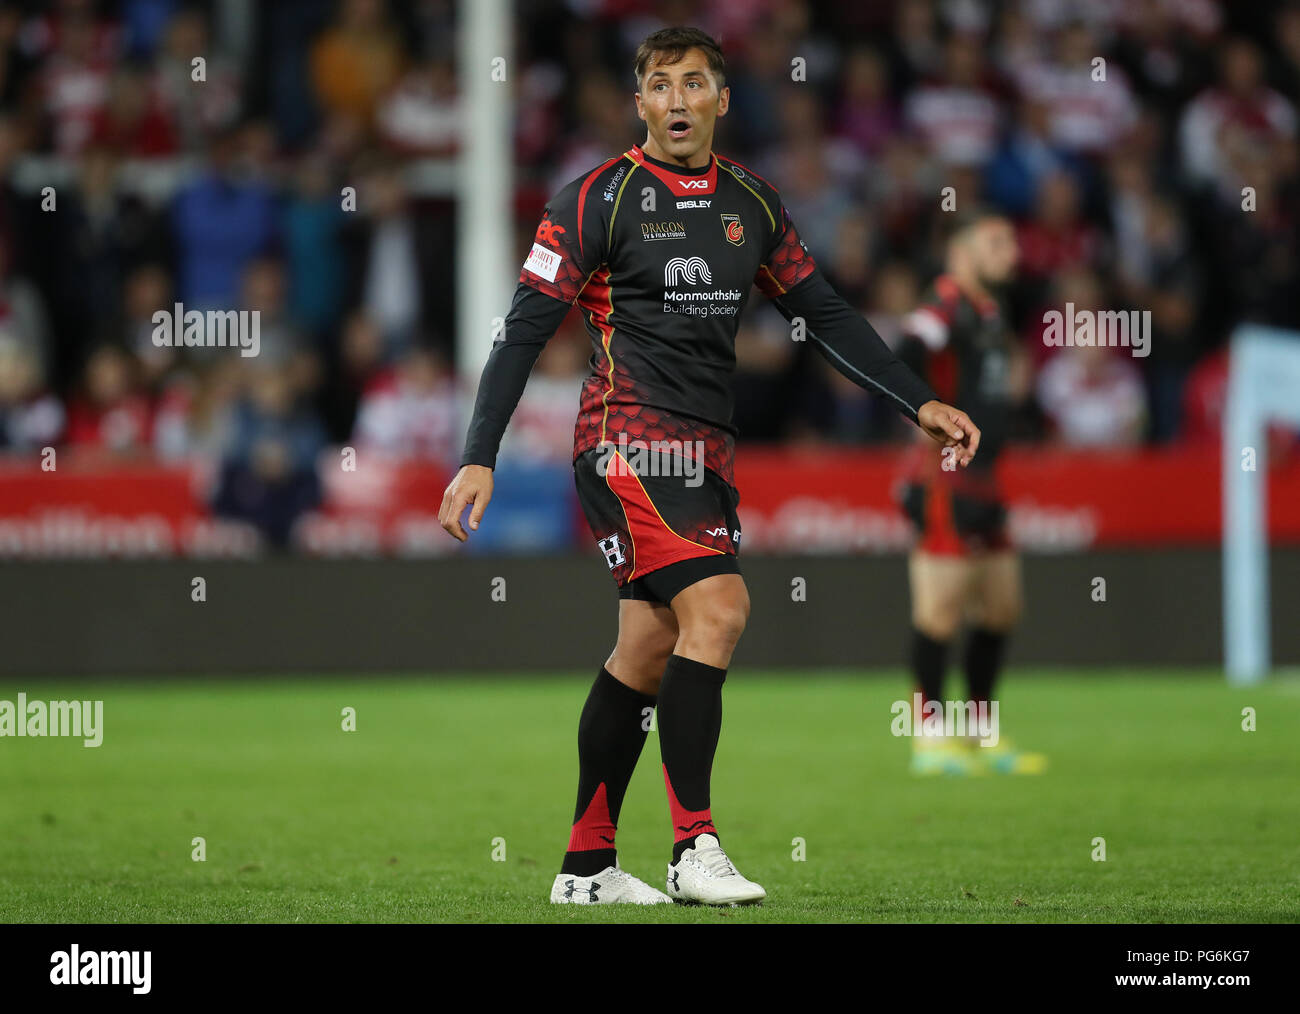 Dragons Gavin Henson during the pre-season friendly match at Kingsholm Stadium, Gloucester. PRESS ASSOCIATION Photo. Picture date: Thursday August 23, 2018. See PA story RUGBYU Gloucester. Photo credit should read: David Davies/PA Wire. RESTRICTIONS: Editorial use only. No commercial use. Stock Photo